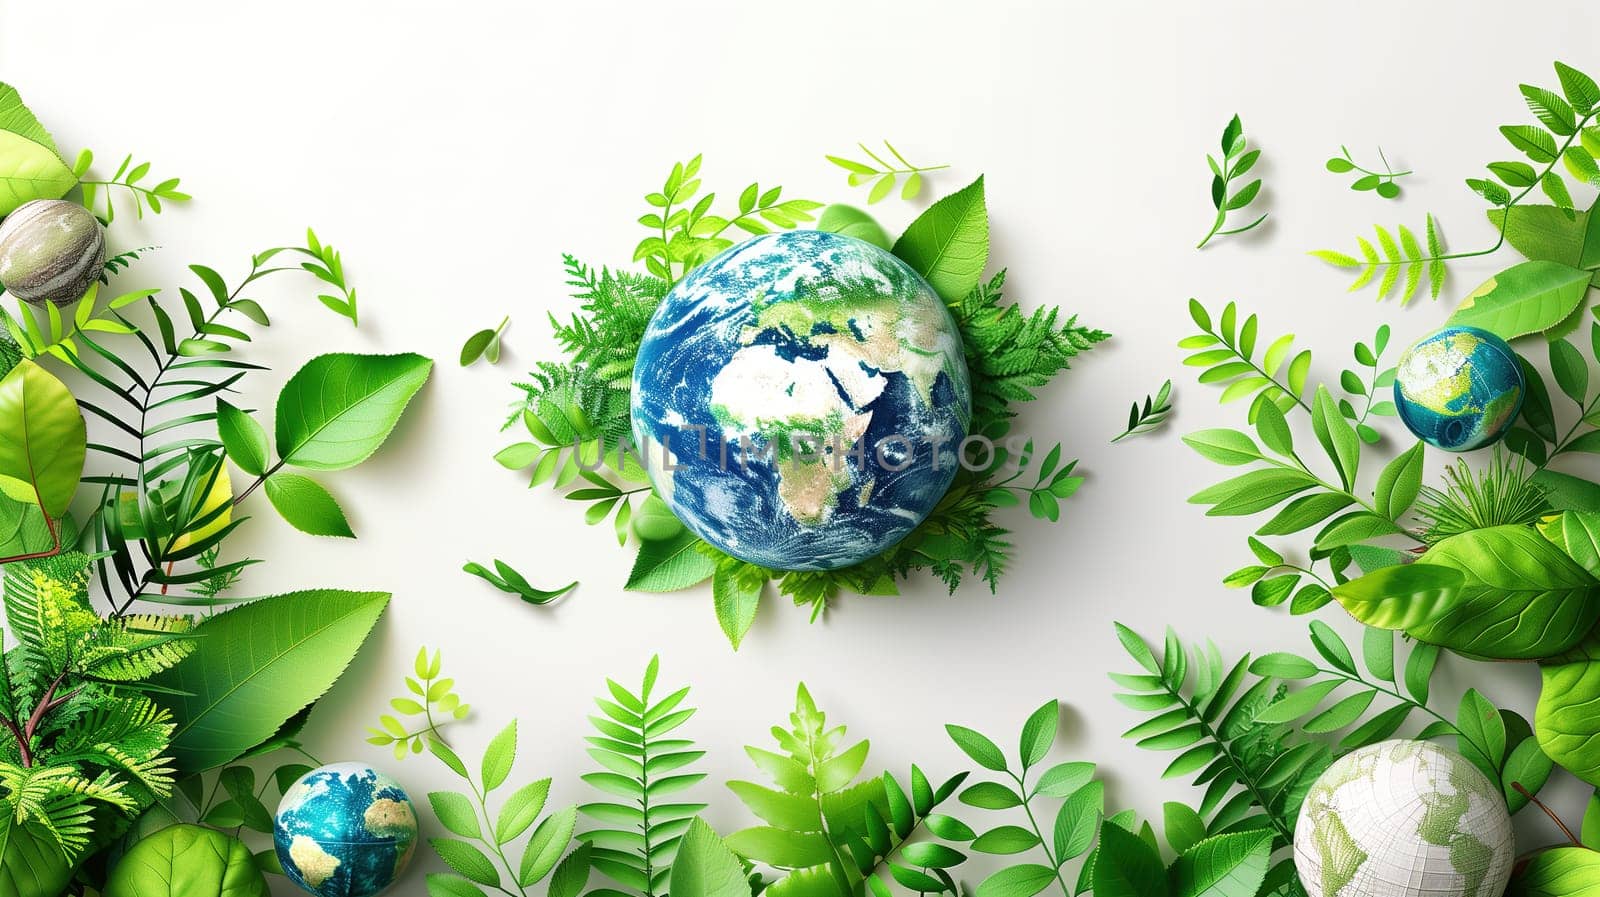 In honor of Earth Day, a symbolic representation of global conservation efforts is portrayed with a vibrant display of lush foliage and miniature globes nestled among the greenery. The center globe stands out as a reminder of the planet we strive to protect and nurture.